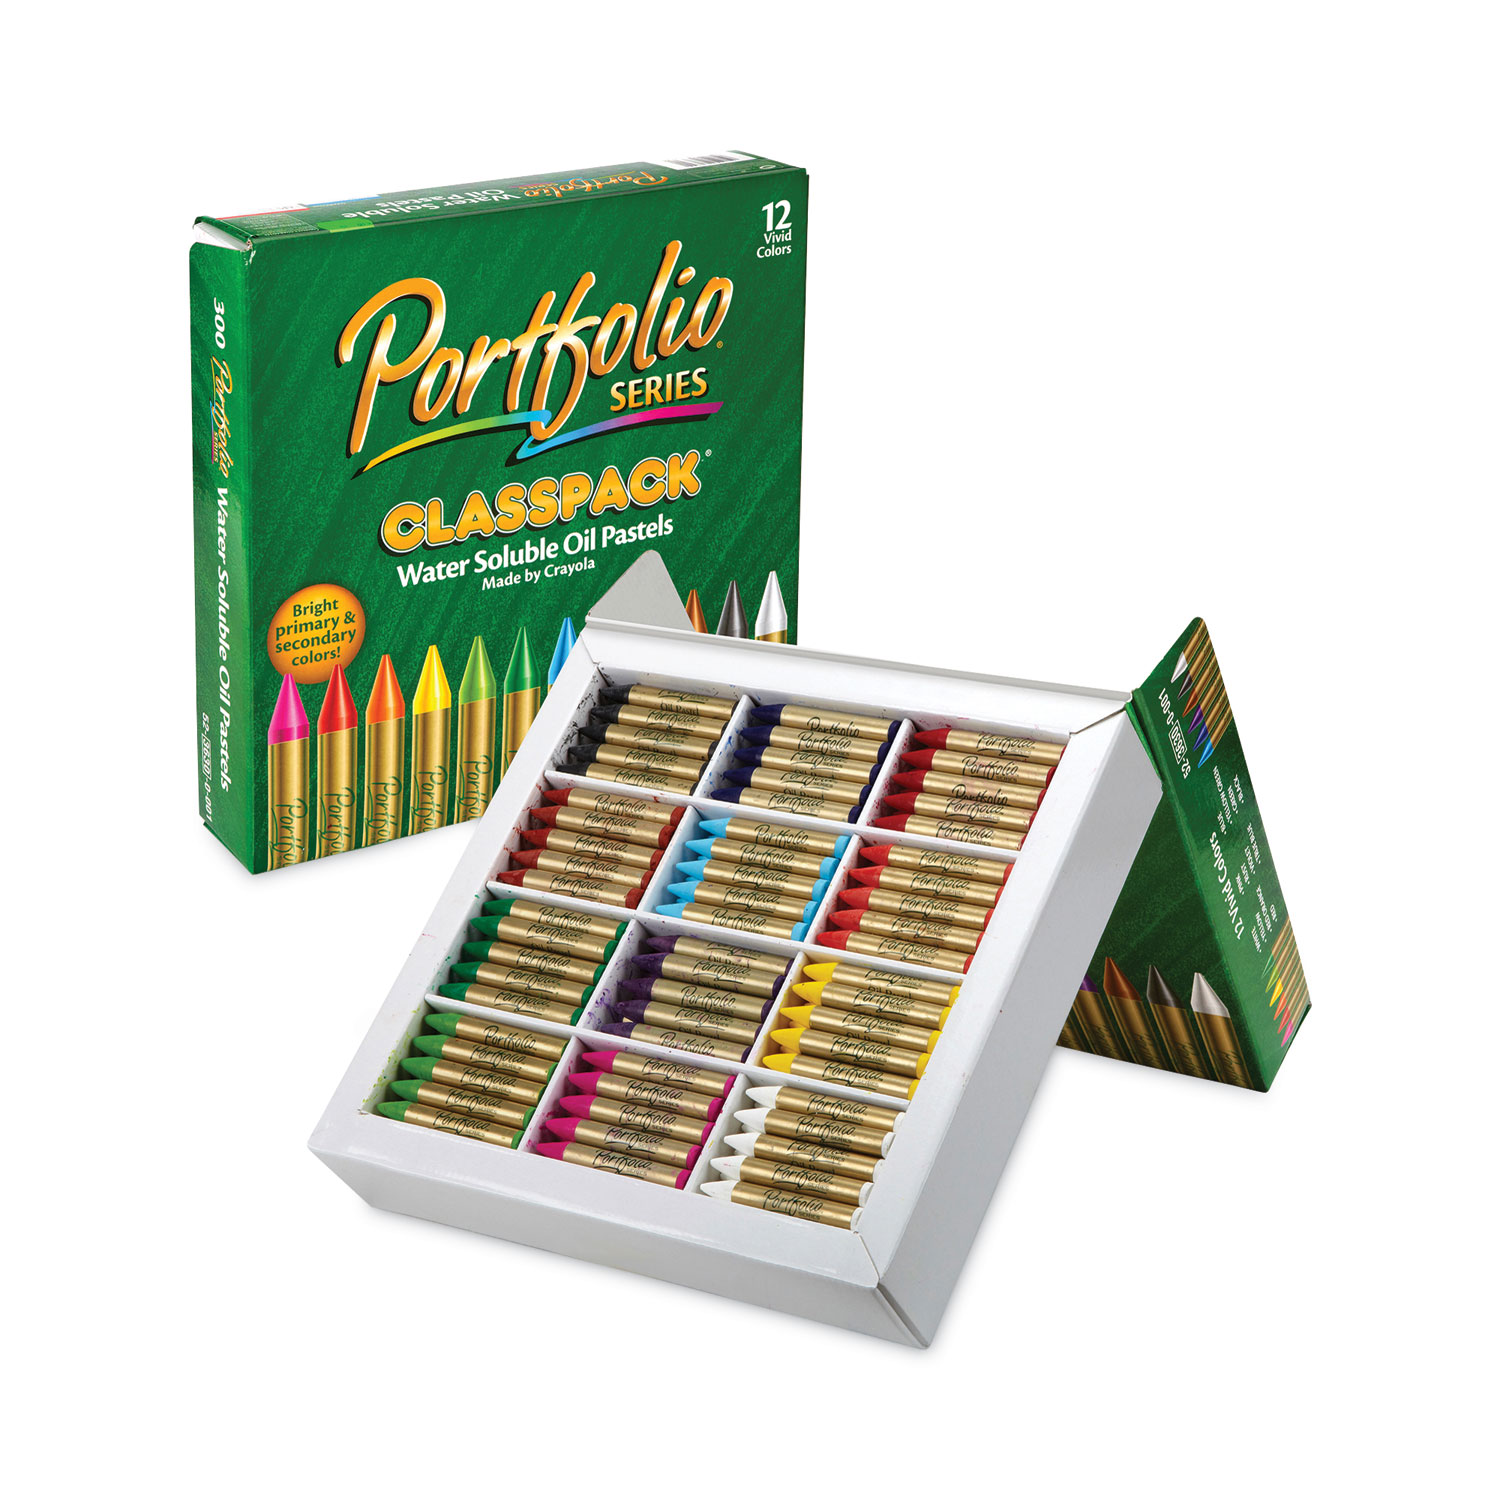 Portfolio Water Soluble Oil Pastels, 12 Colors - Artist & Craftsman Supply